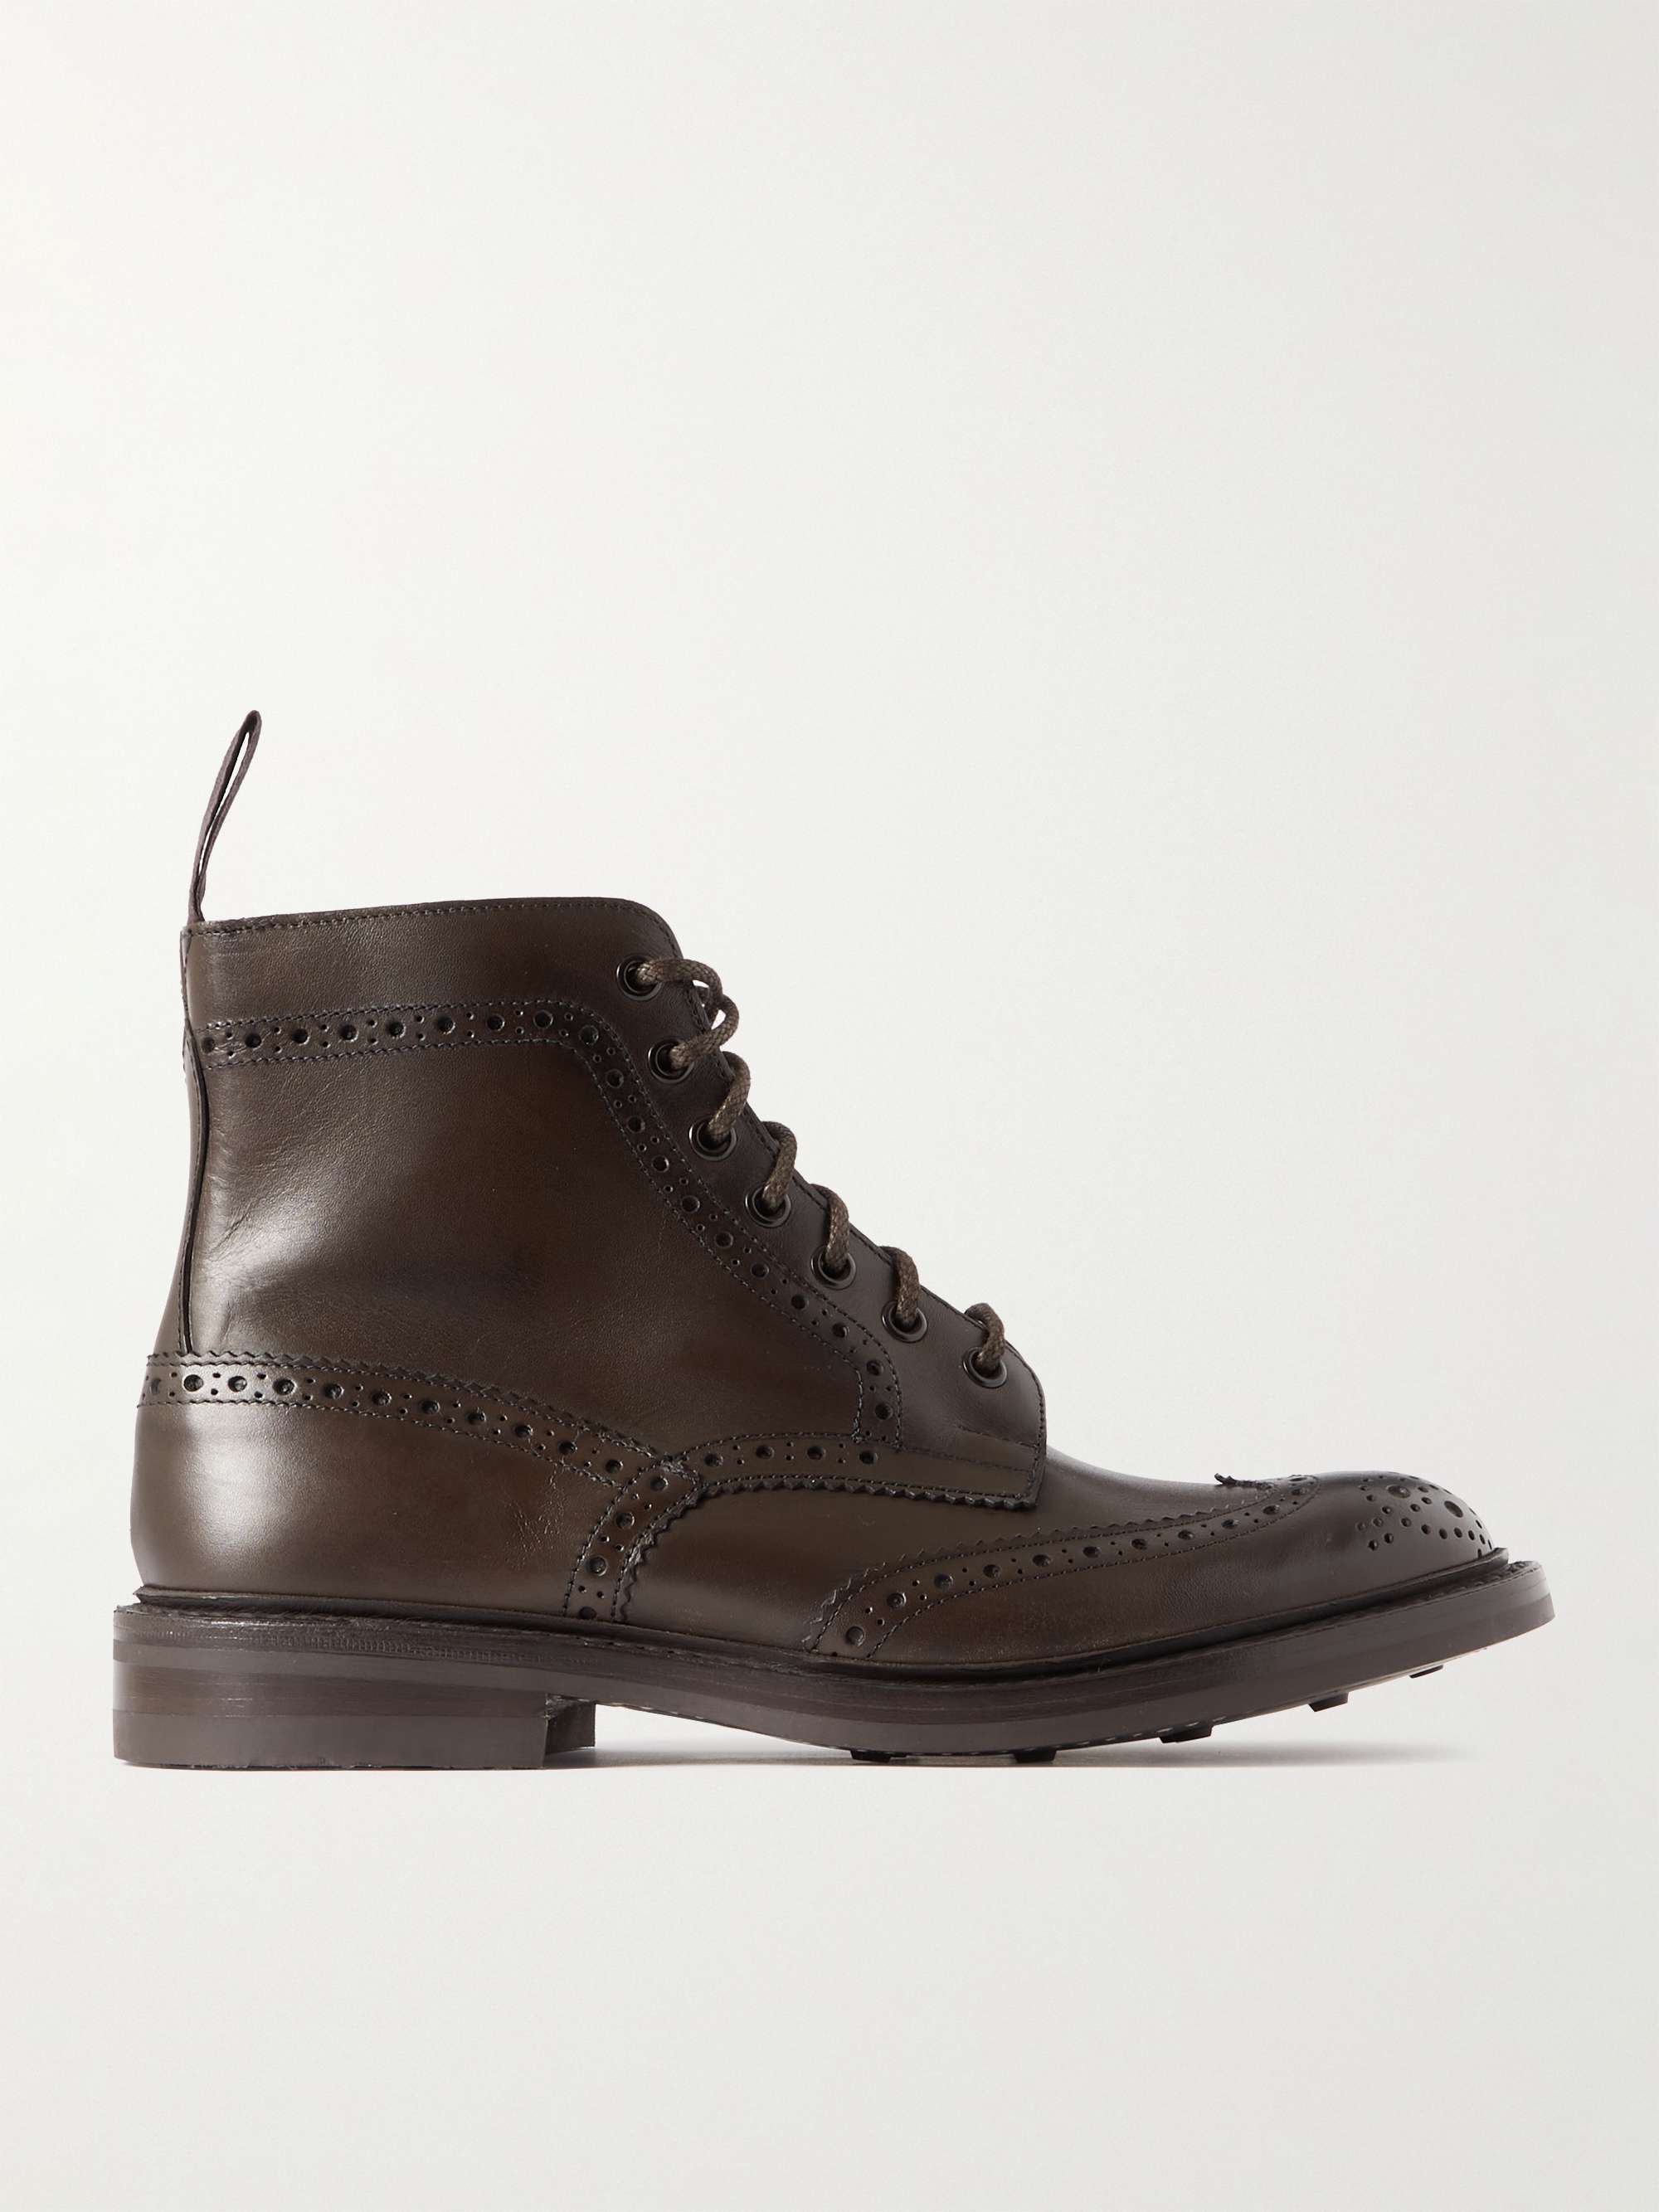 TRICKER'S Stow Leather Brogue Boots for Men | MR PORTER